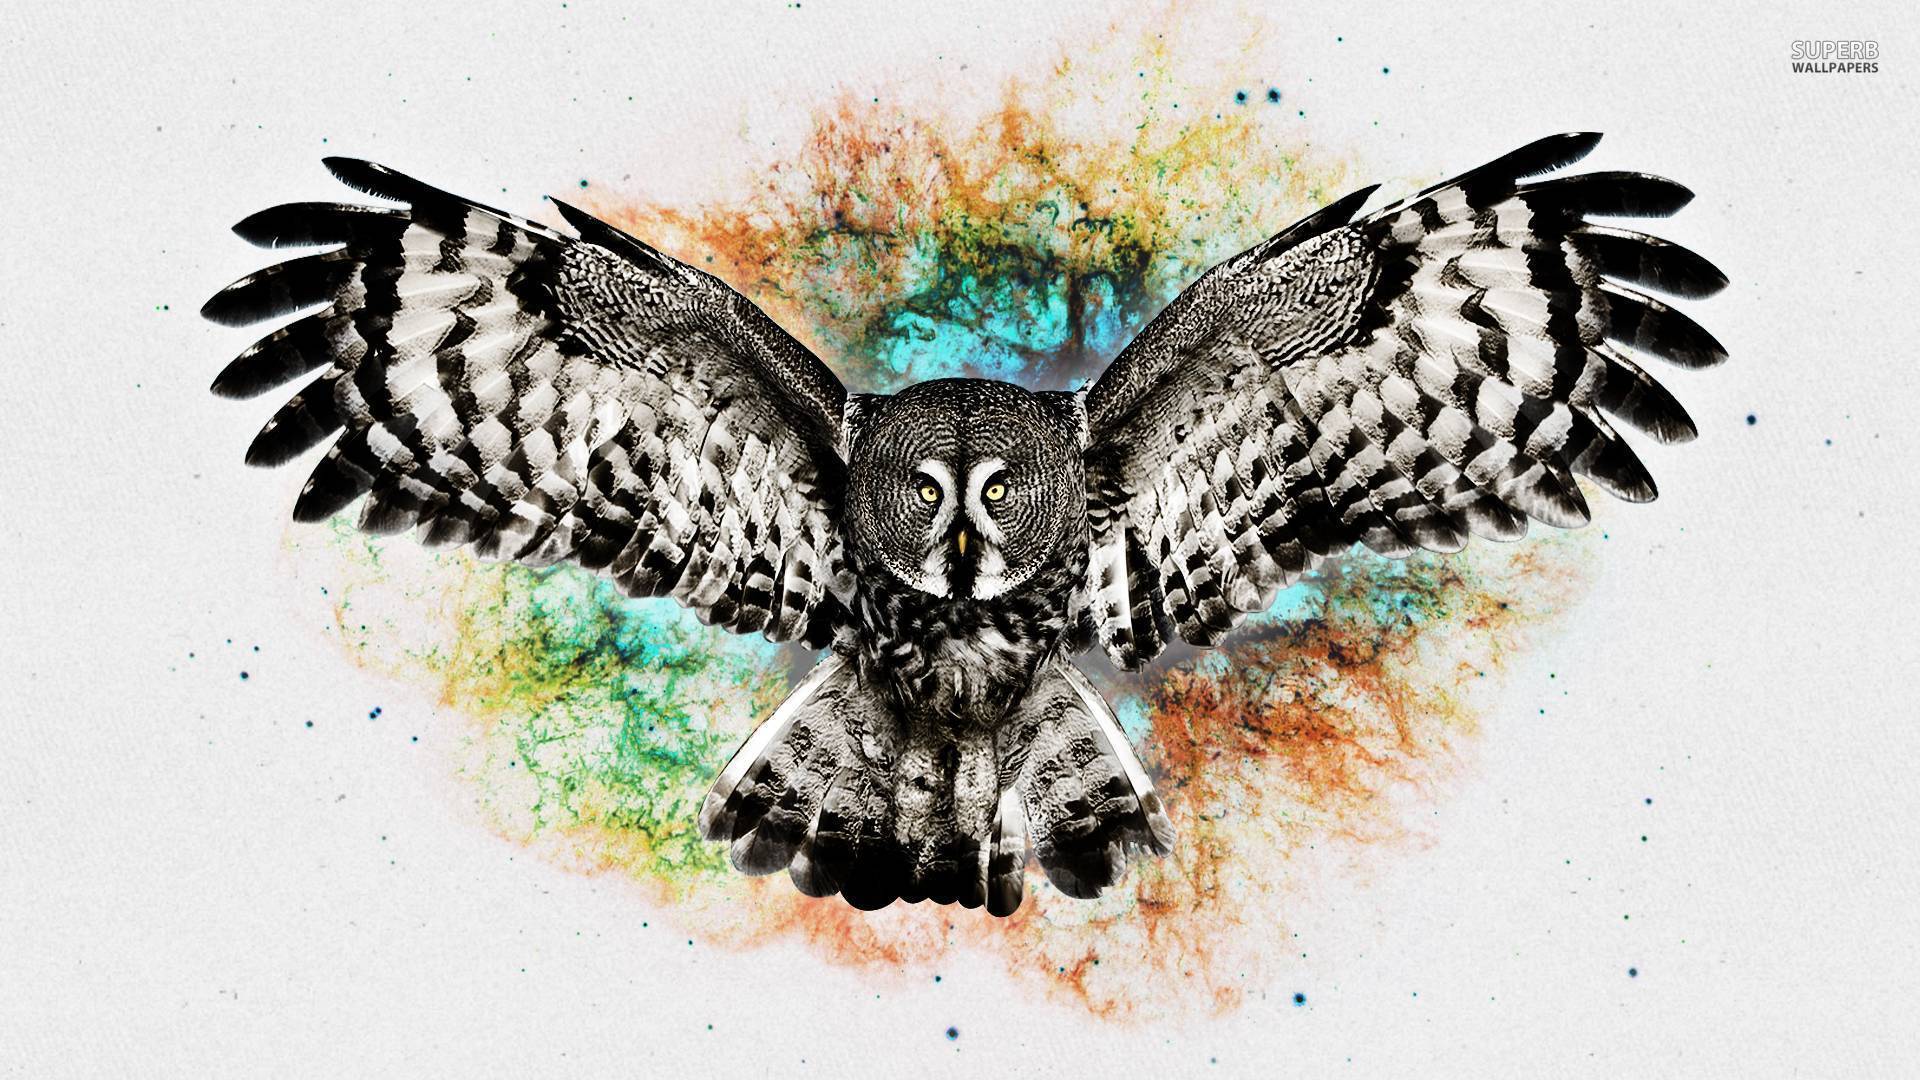 Owl Wallpaper, Background, Image, Picture. Design Trends